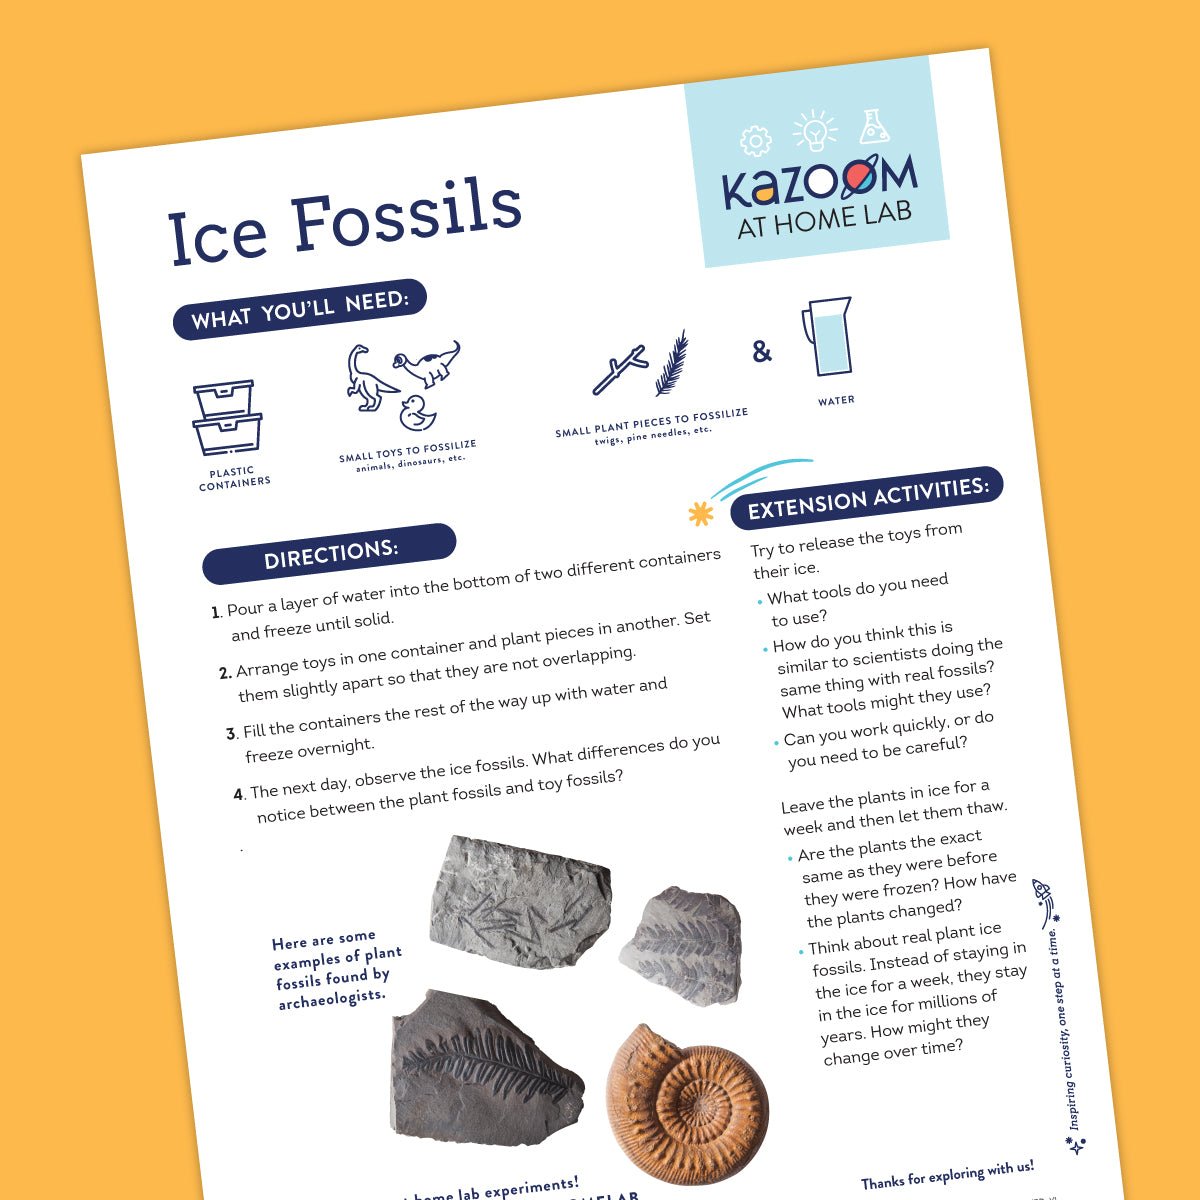 At Home Lab: Ice Fossils